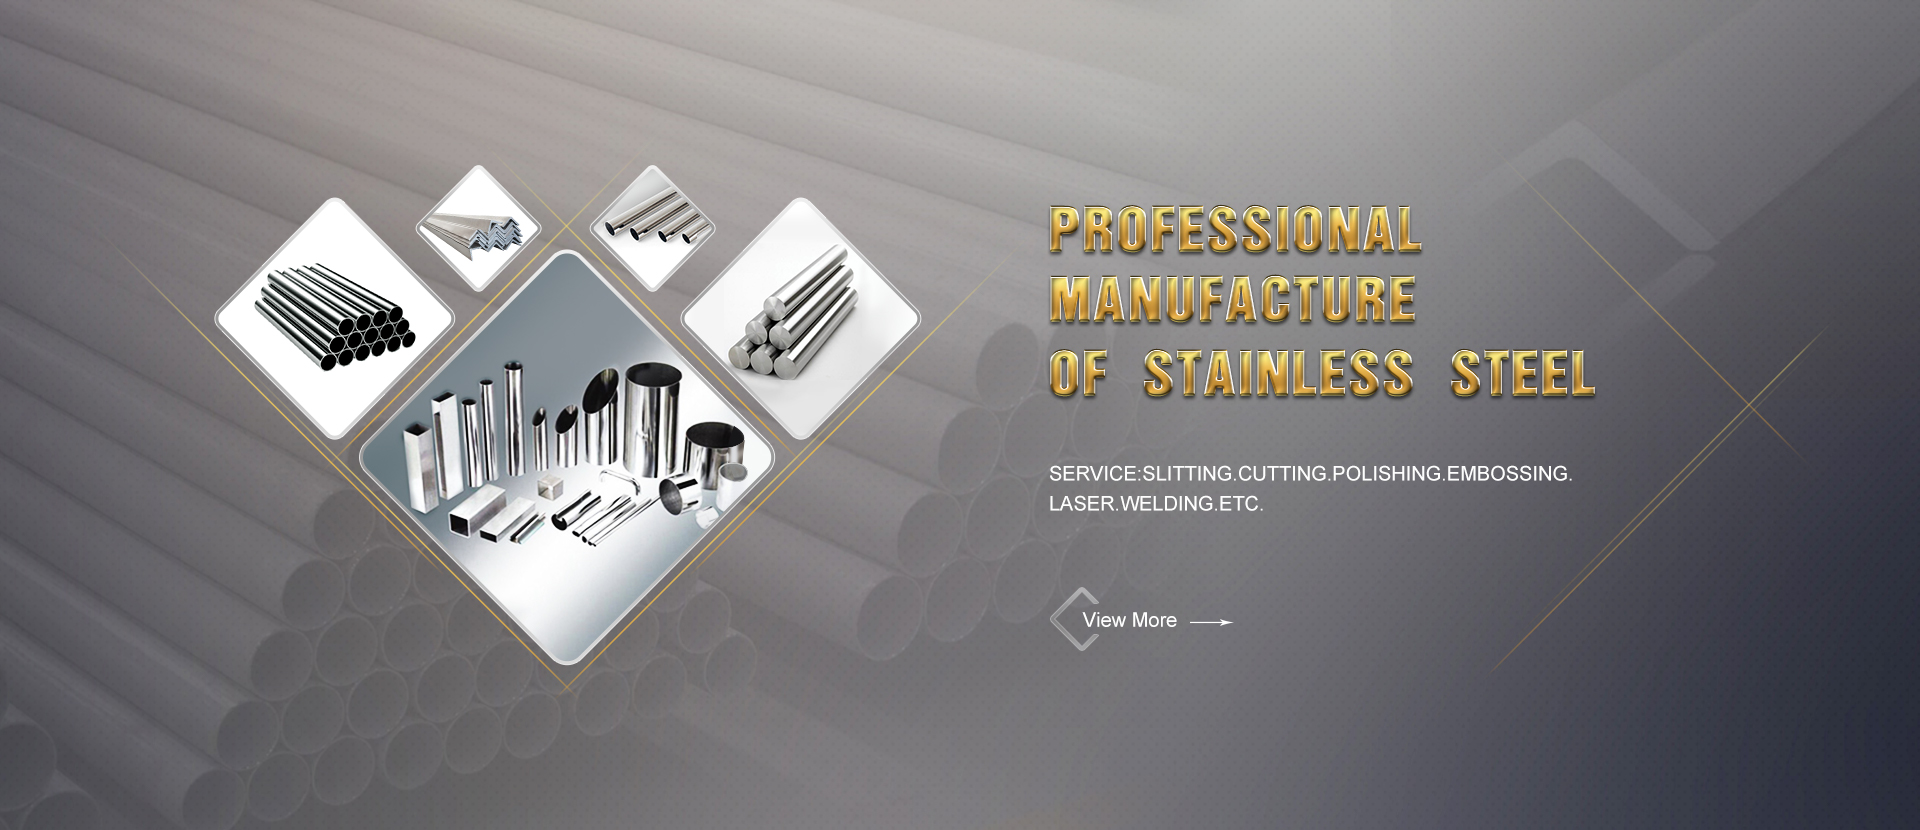 PROFESSIONAL MANUFACTURE OF STAIMLESS STEEL